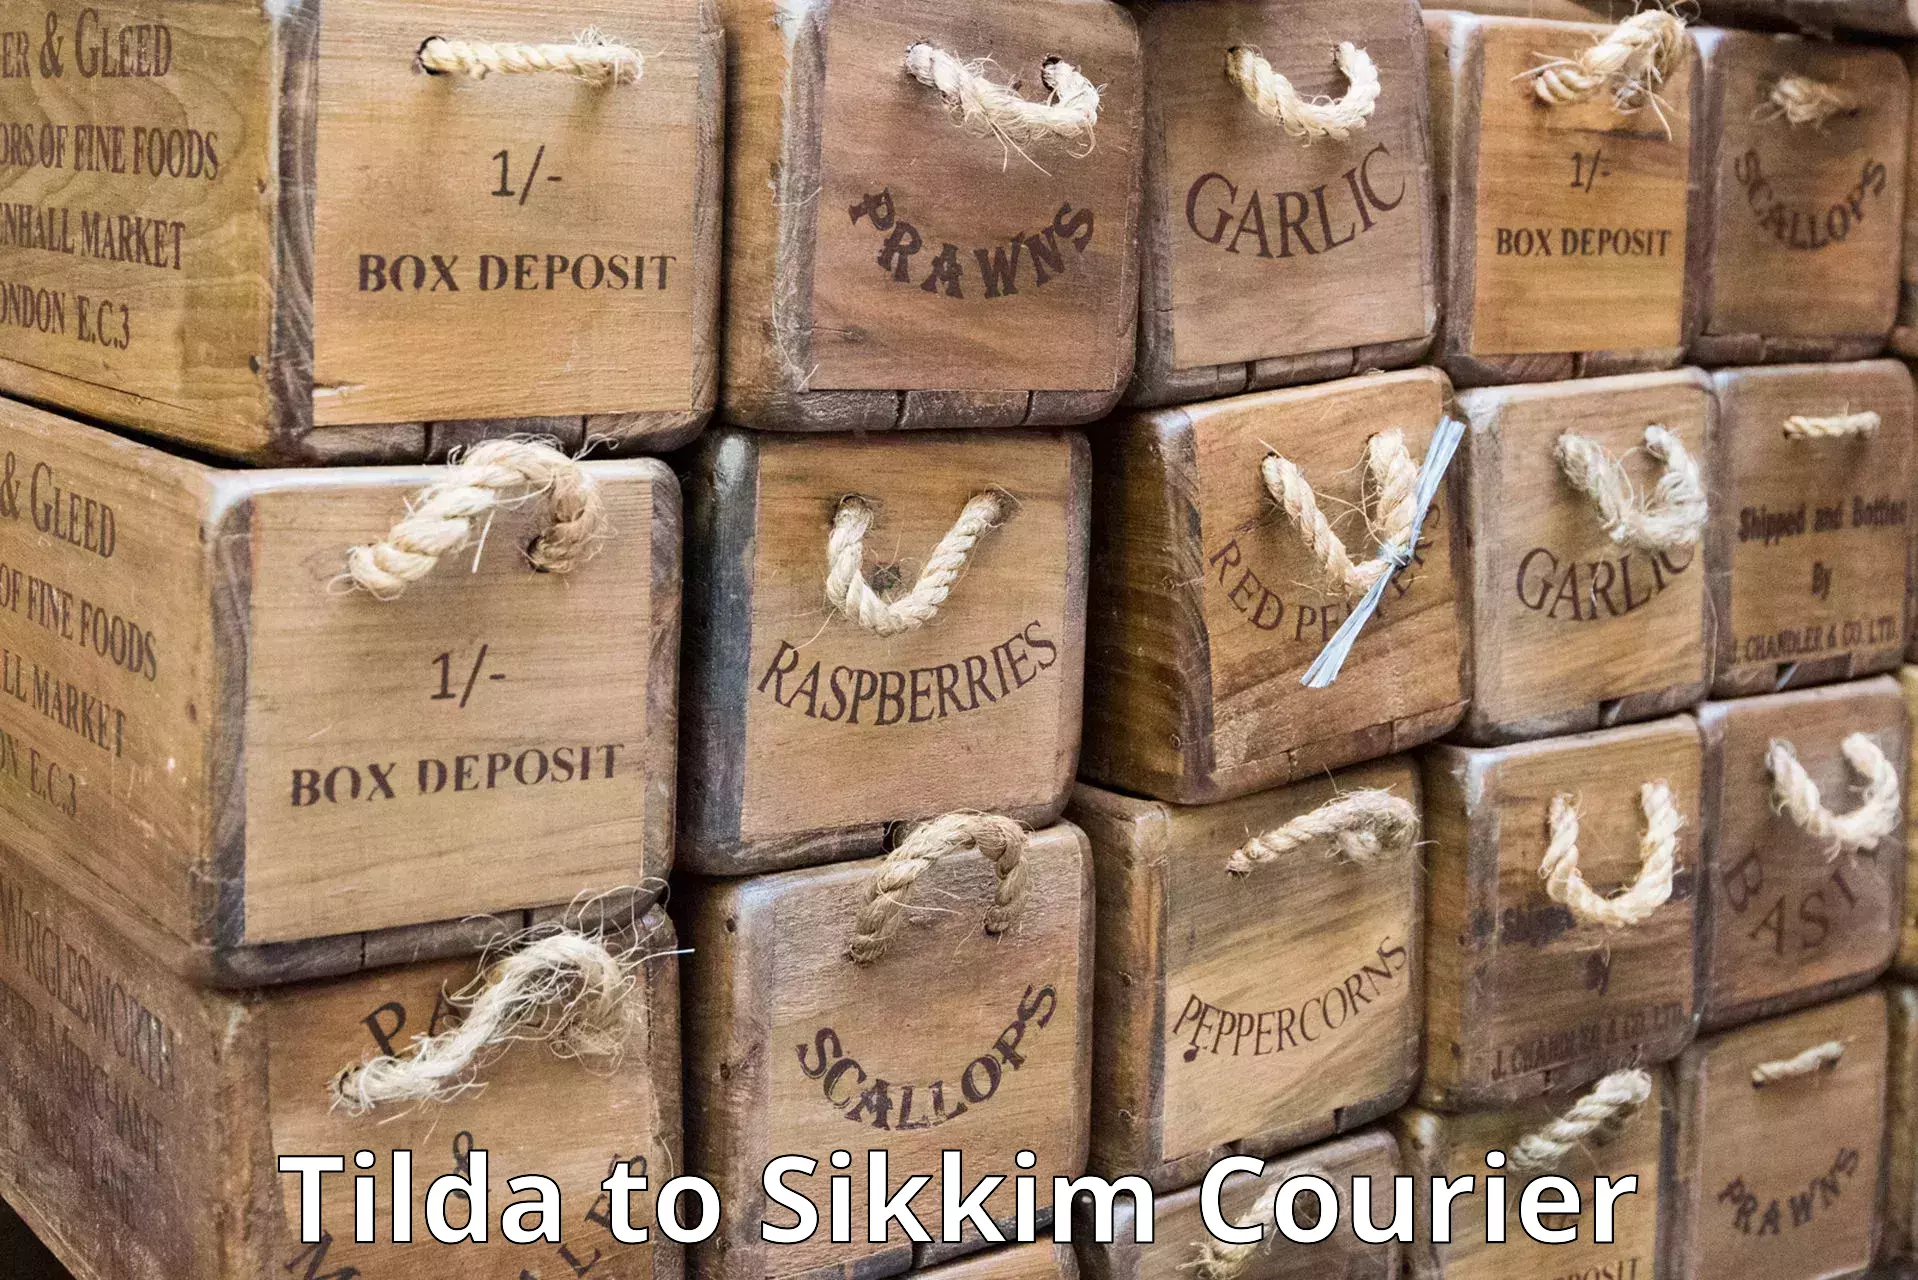 Cash on delivery service Tilda to South Sikkim